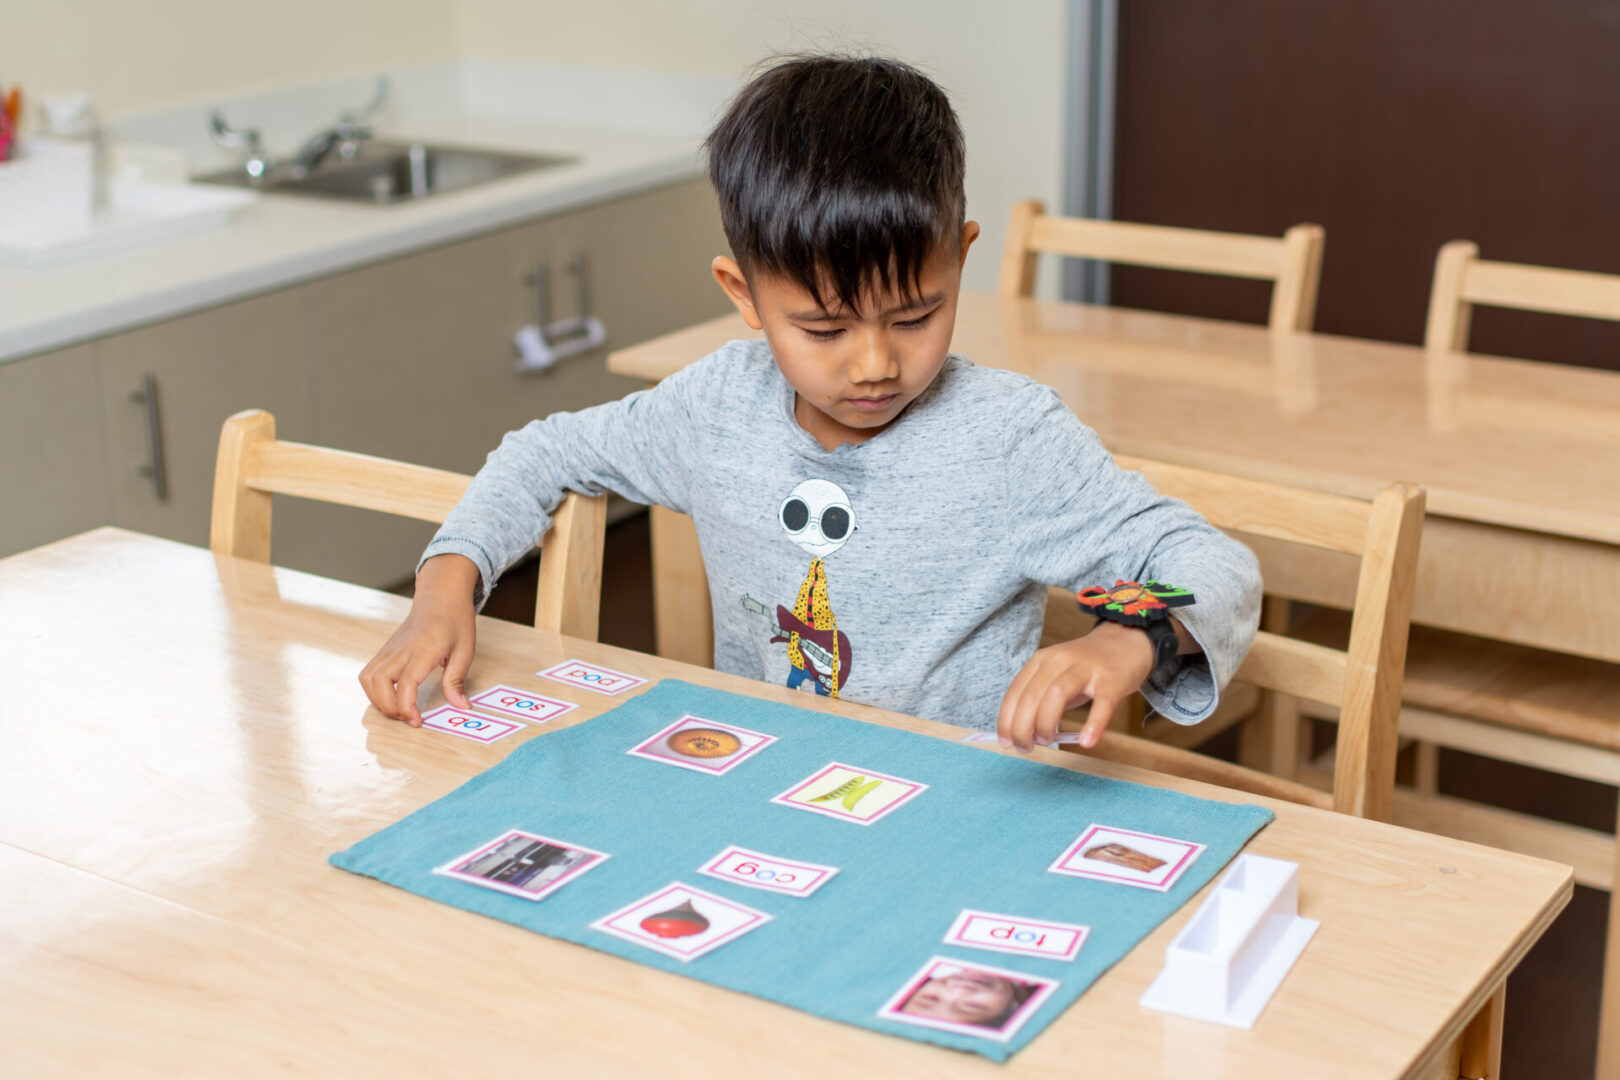 A boy playing with educational photocards